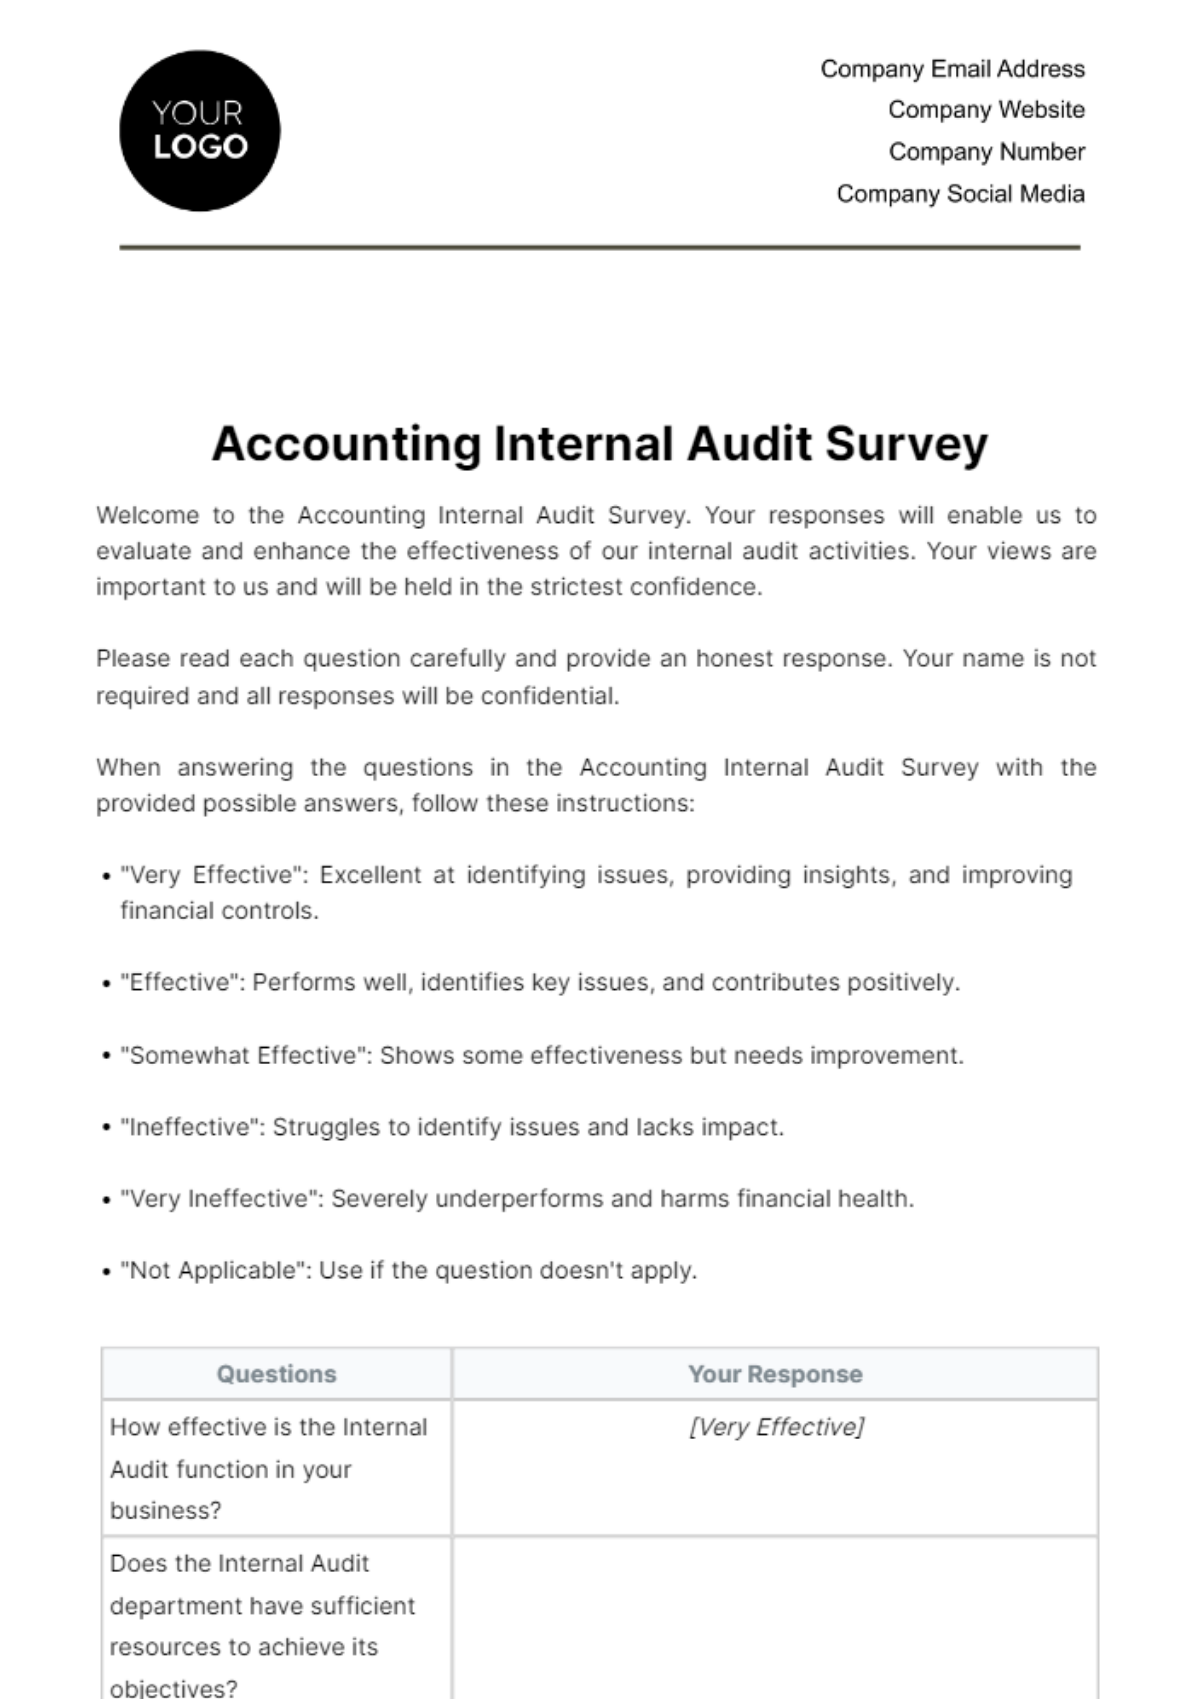 Free Accounting Internal Audit Survey Template